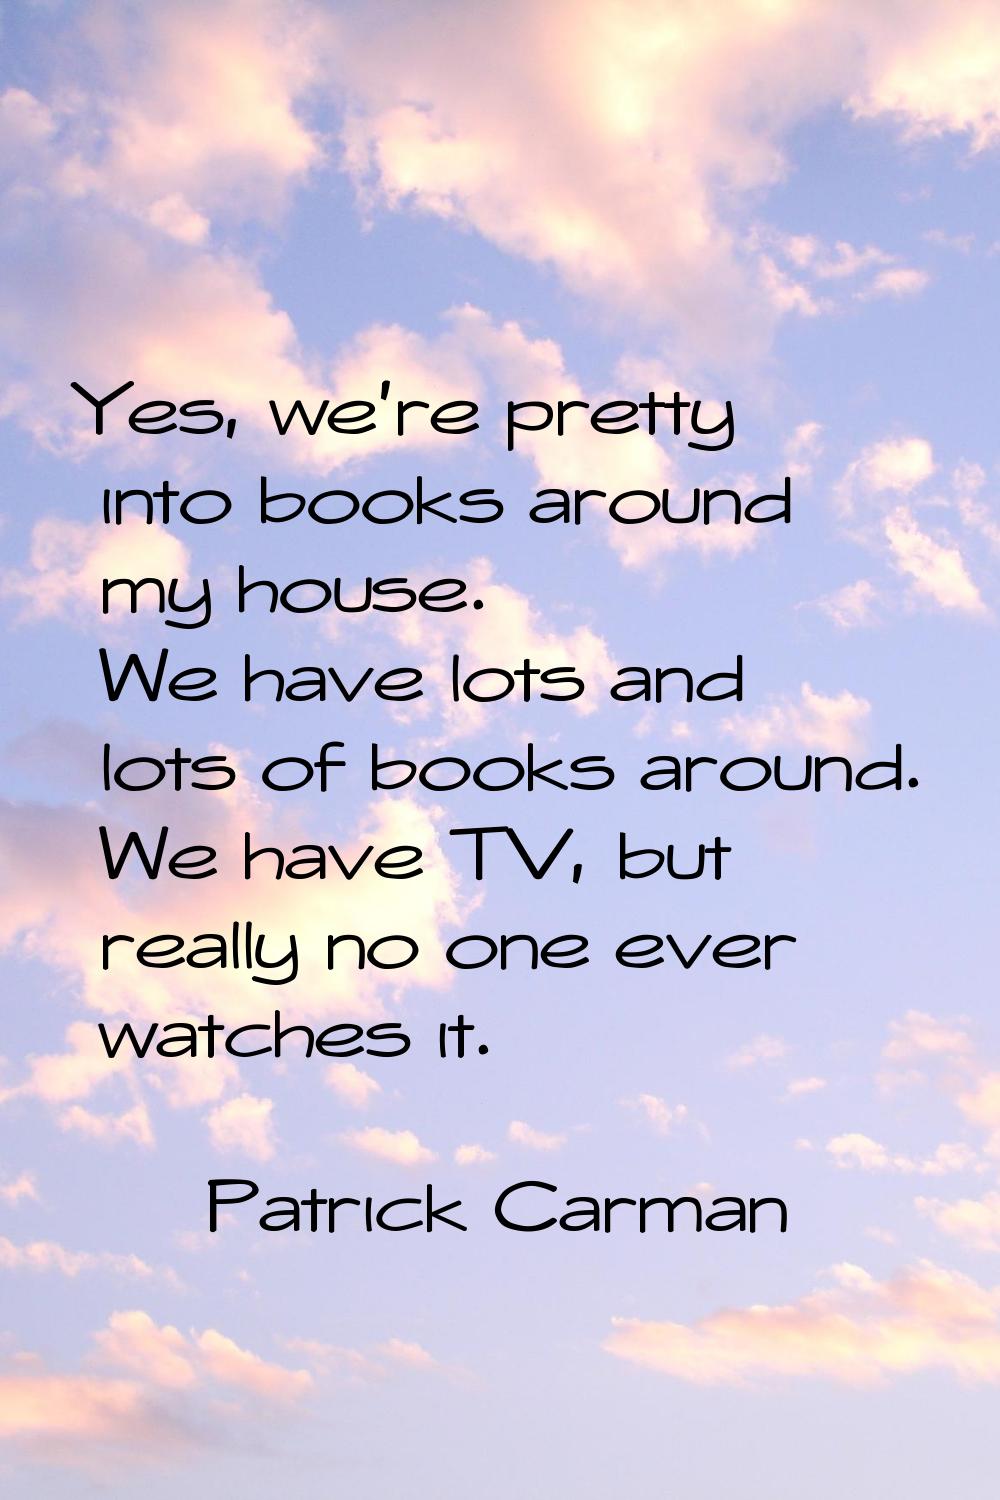 Yes, we're pretty into books around my house. We have lots and lots of books around. We have TV, bu